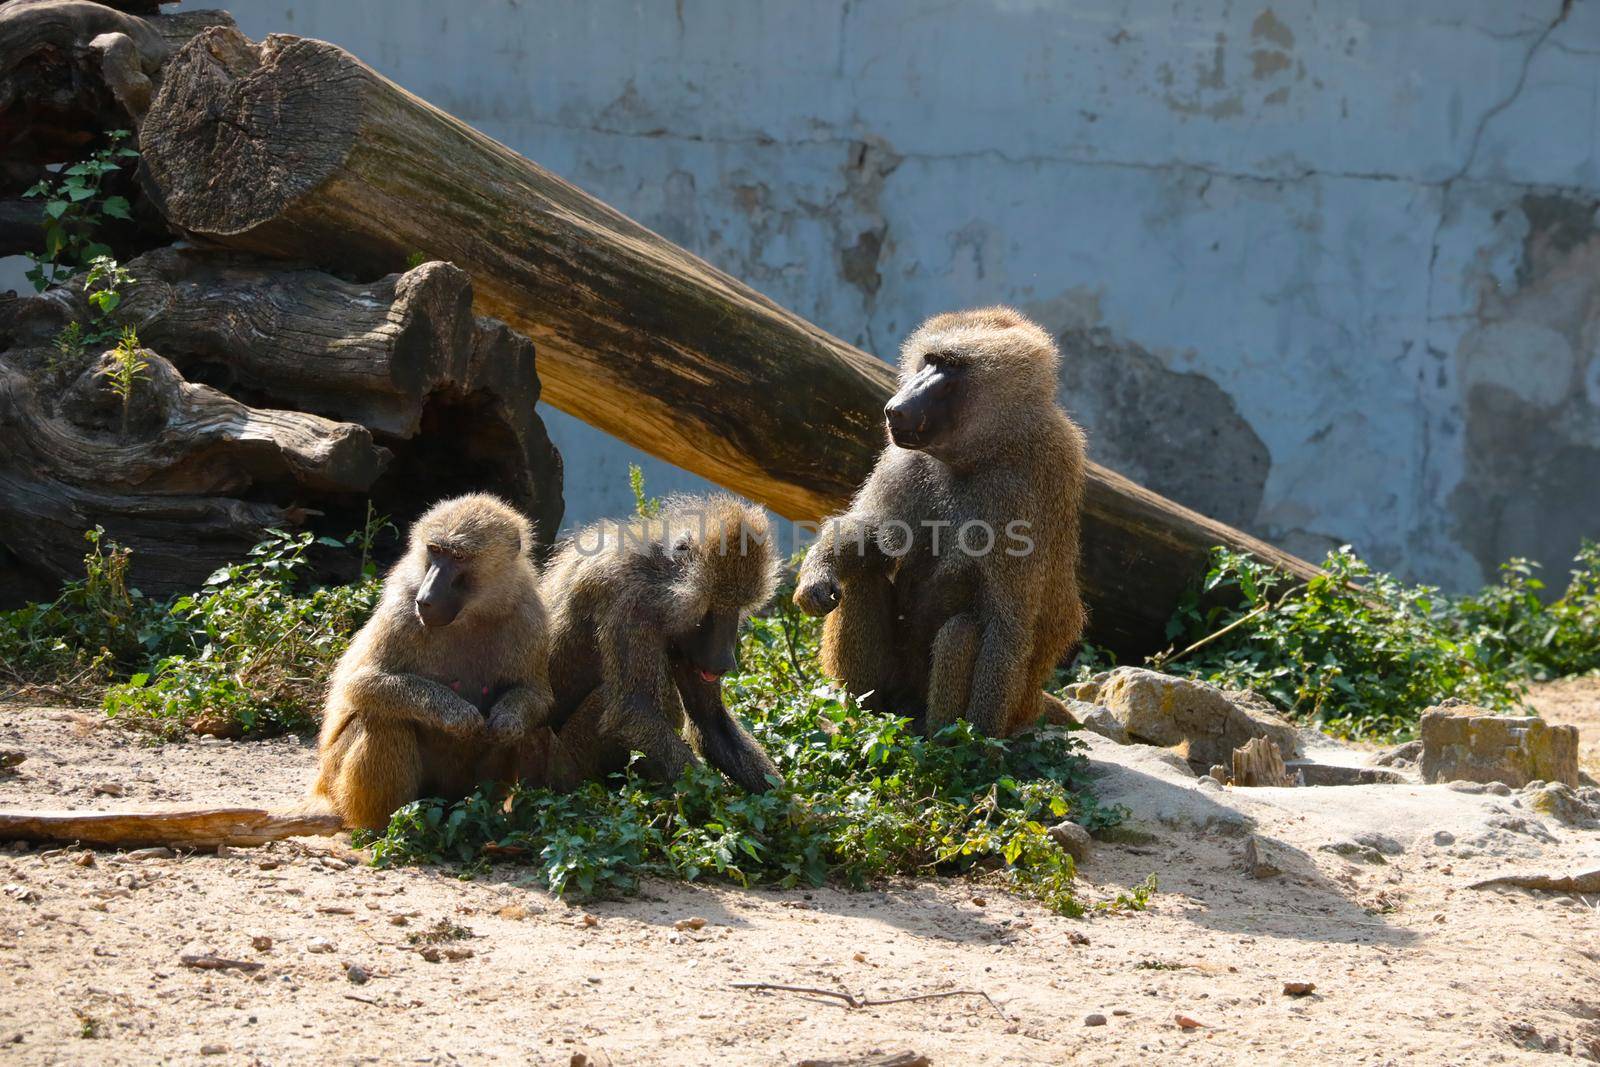 Macaques are sitting on the ground in the park